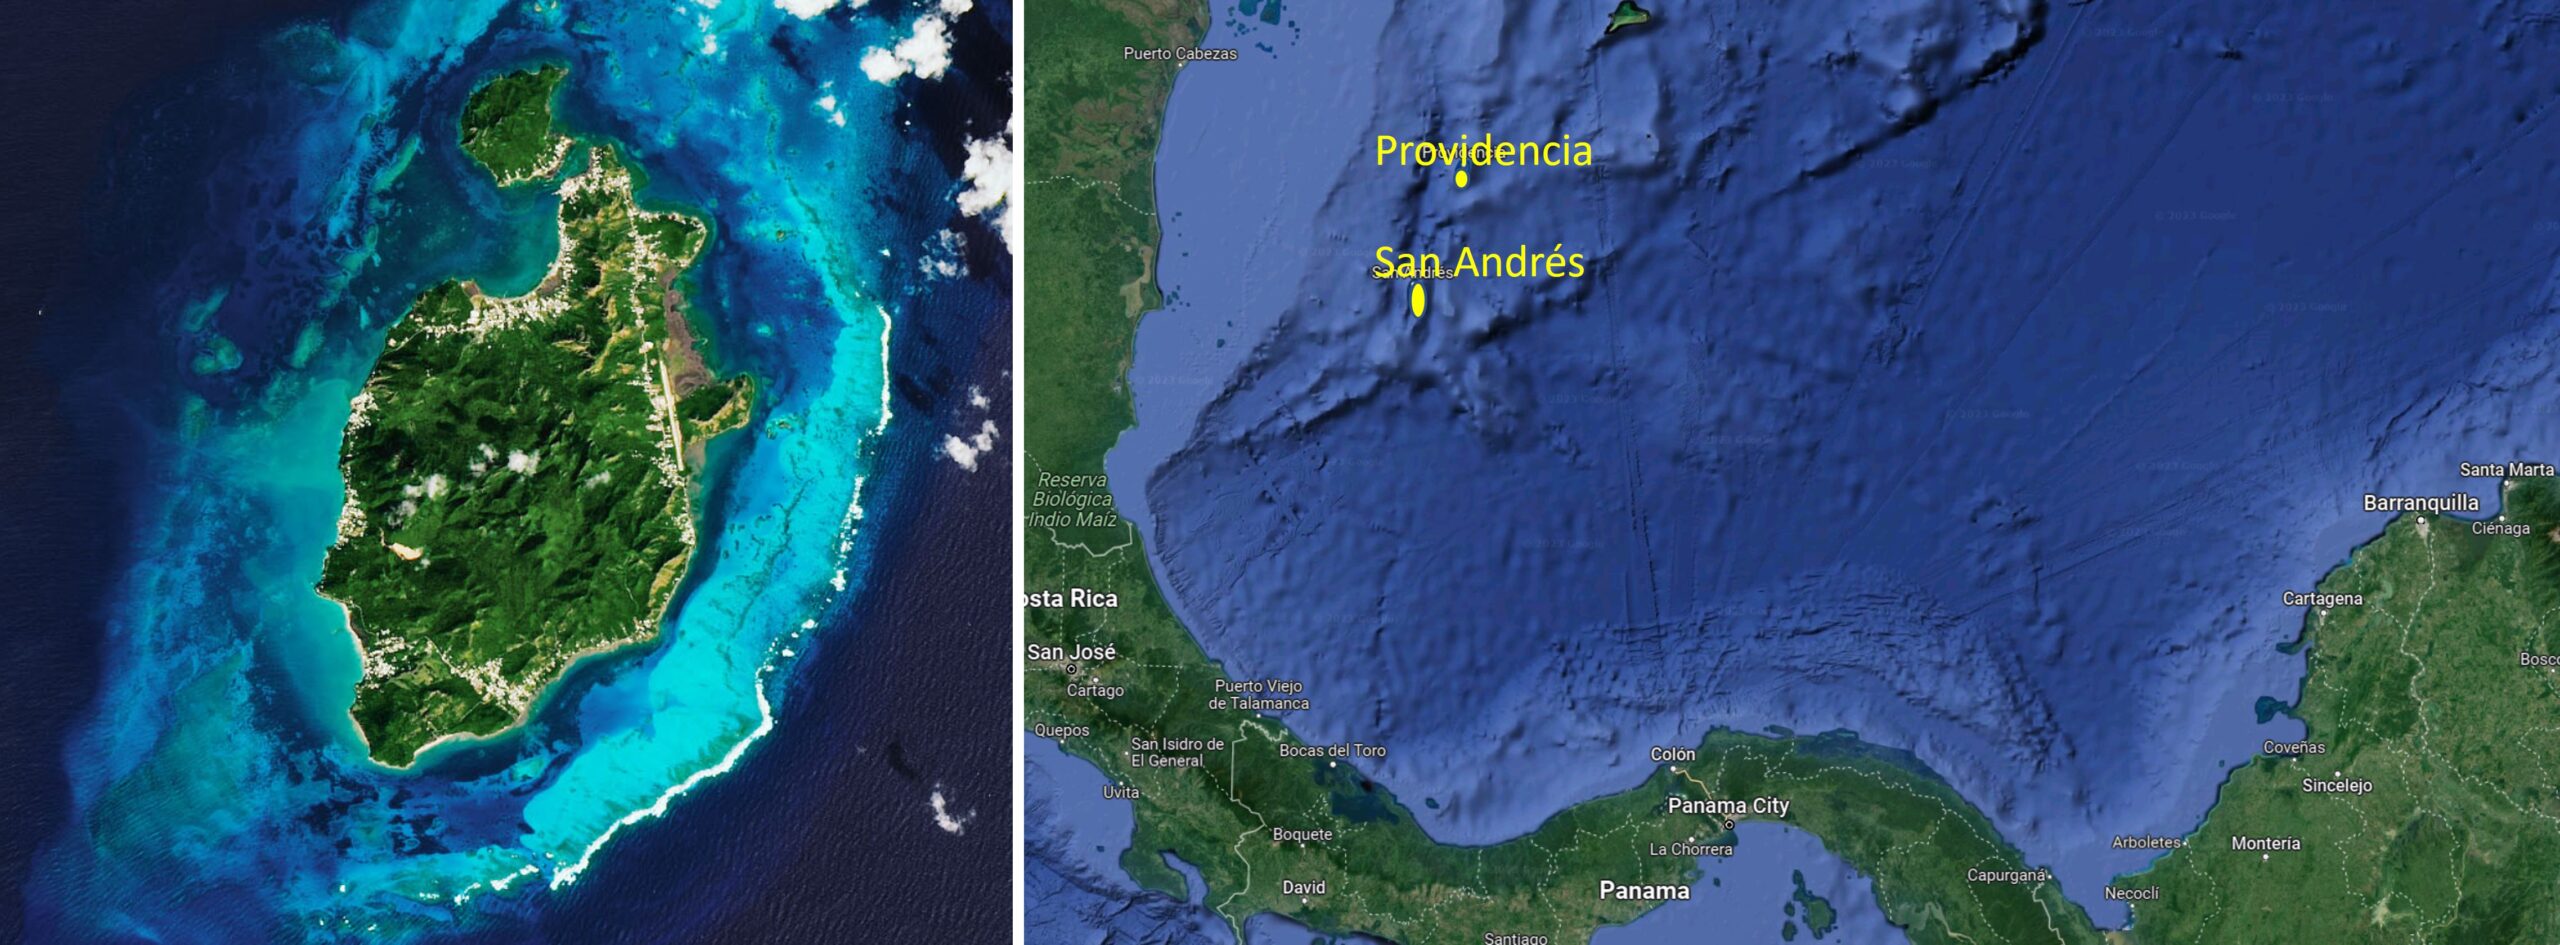 Providencia is 90kms from San Andres, and 900kms from Colombia. The island itself is only 7 kms across, with just 5,000 population.